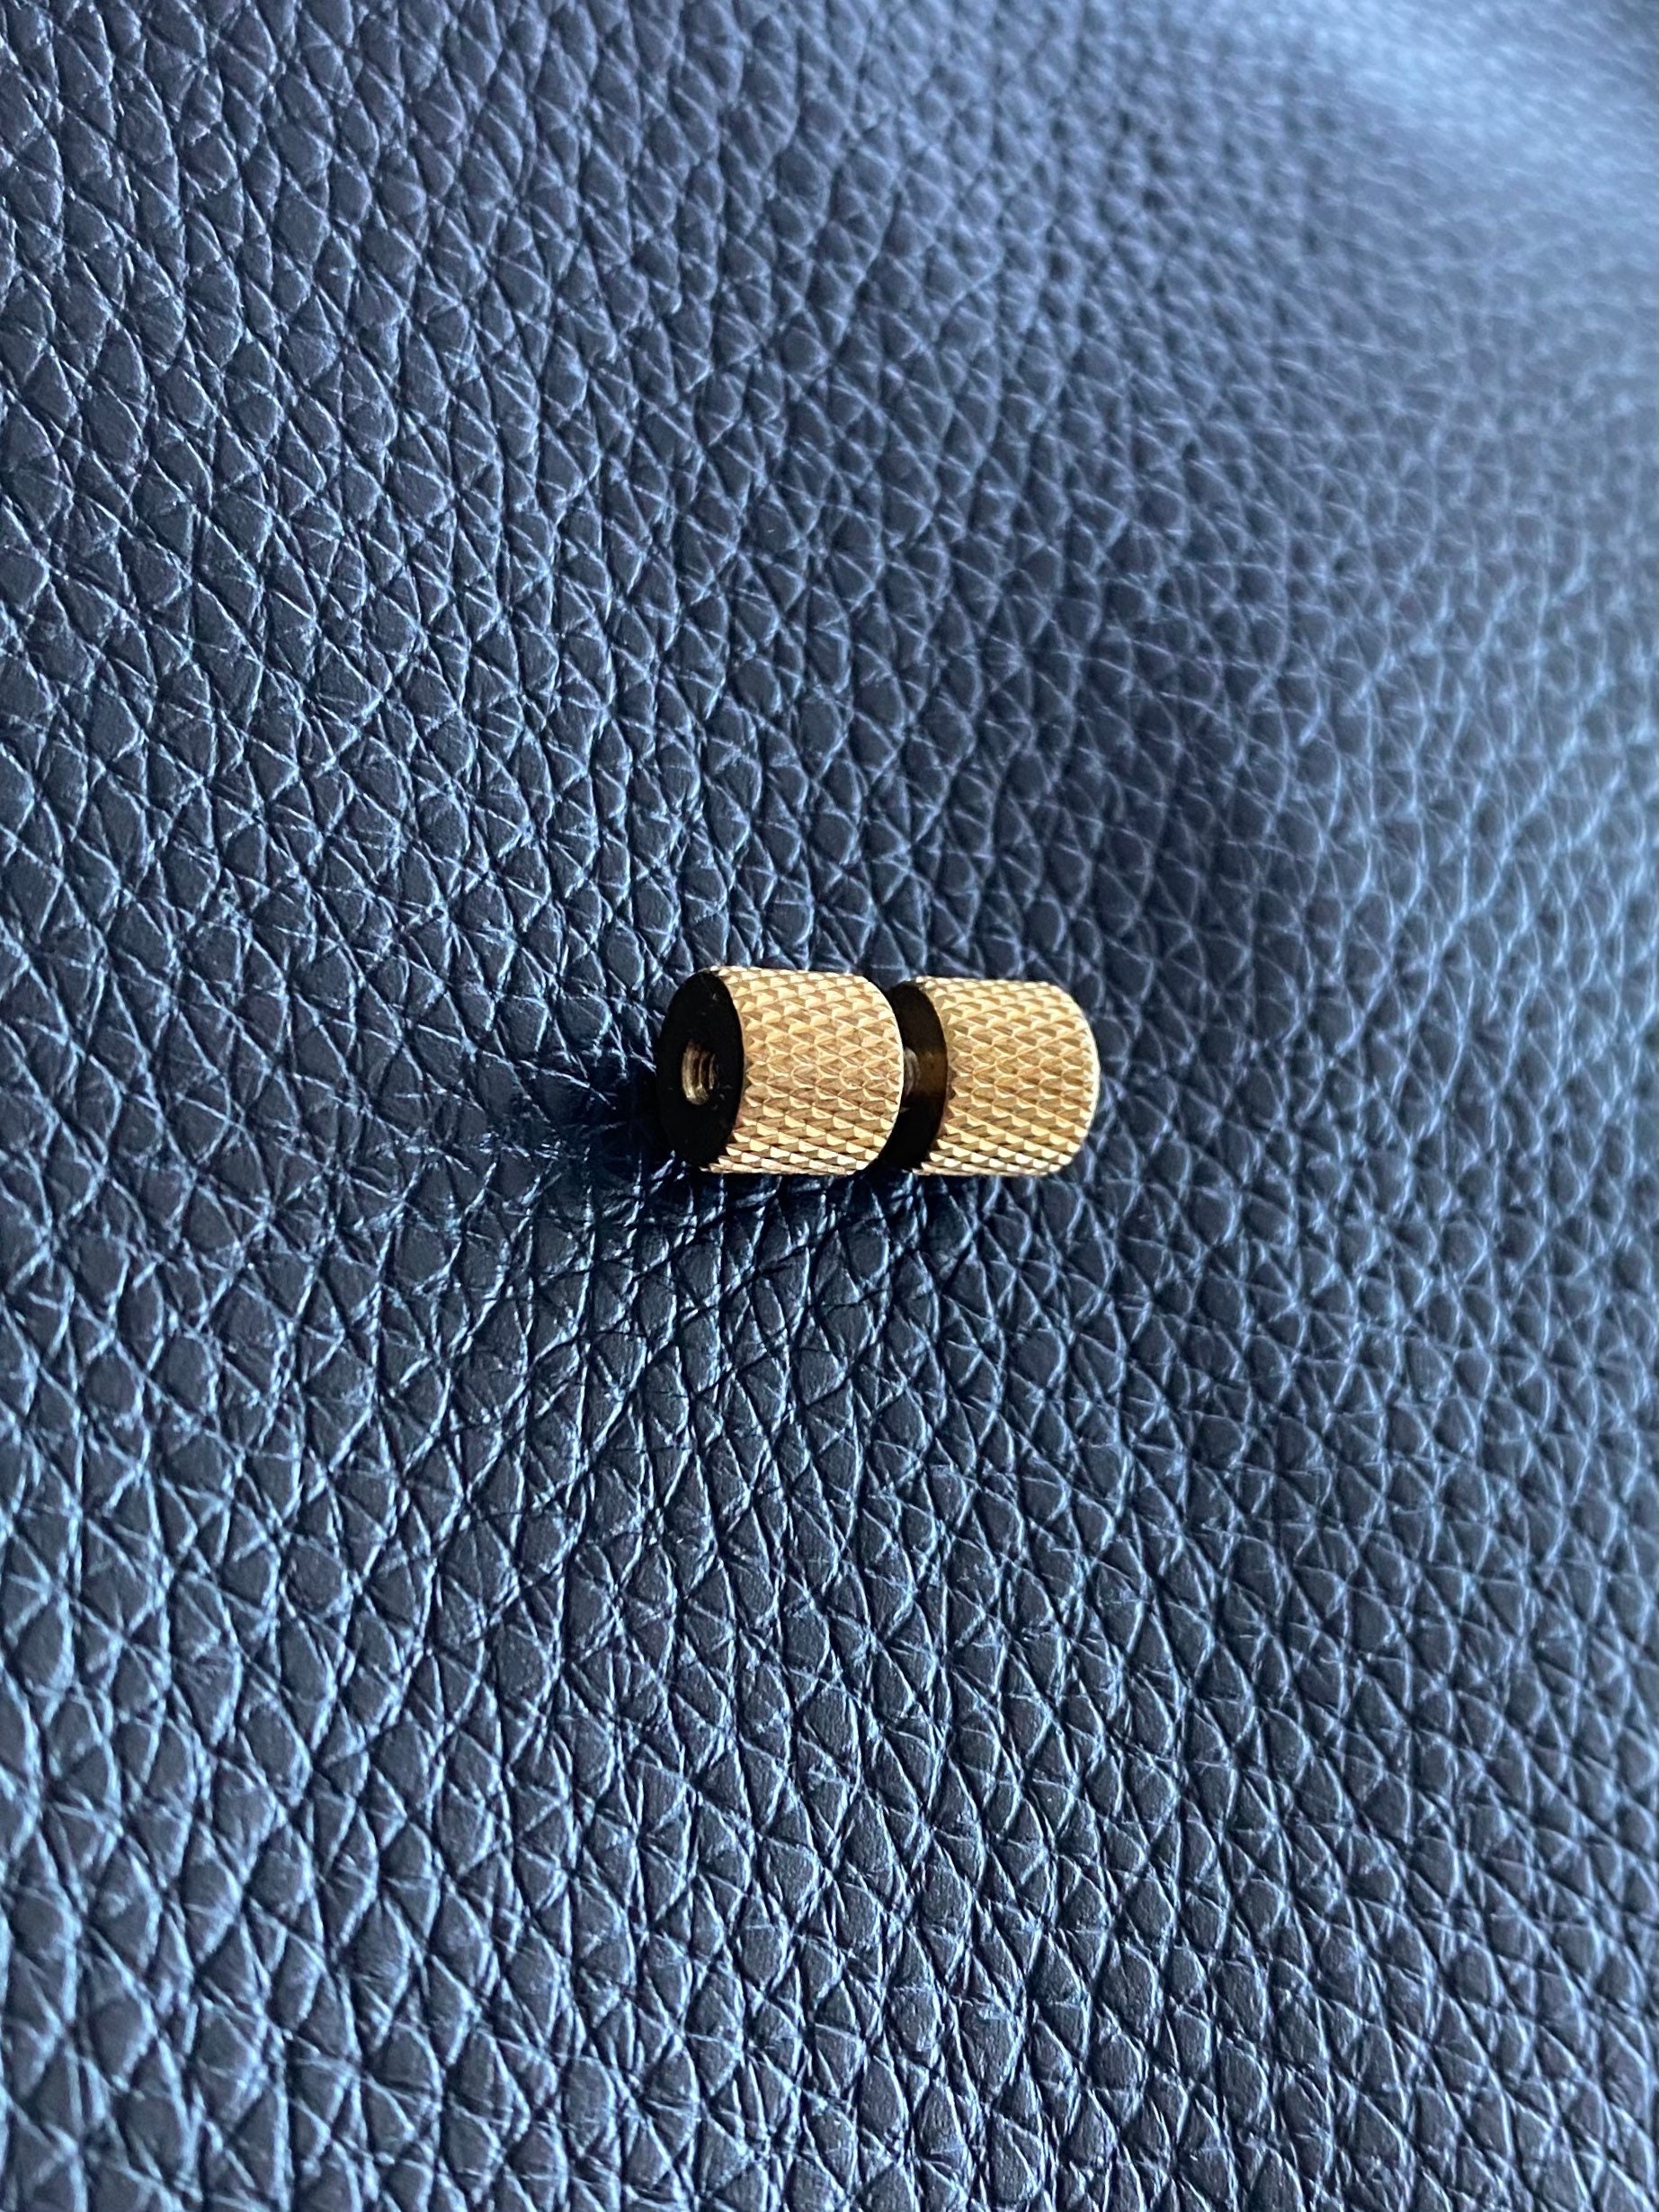 More Listed In Description Brass Big Wheel Thumb Stud Replacement For Benchmade Super Freek